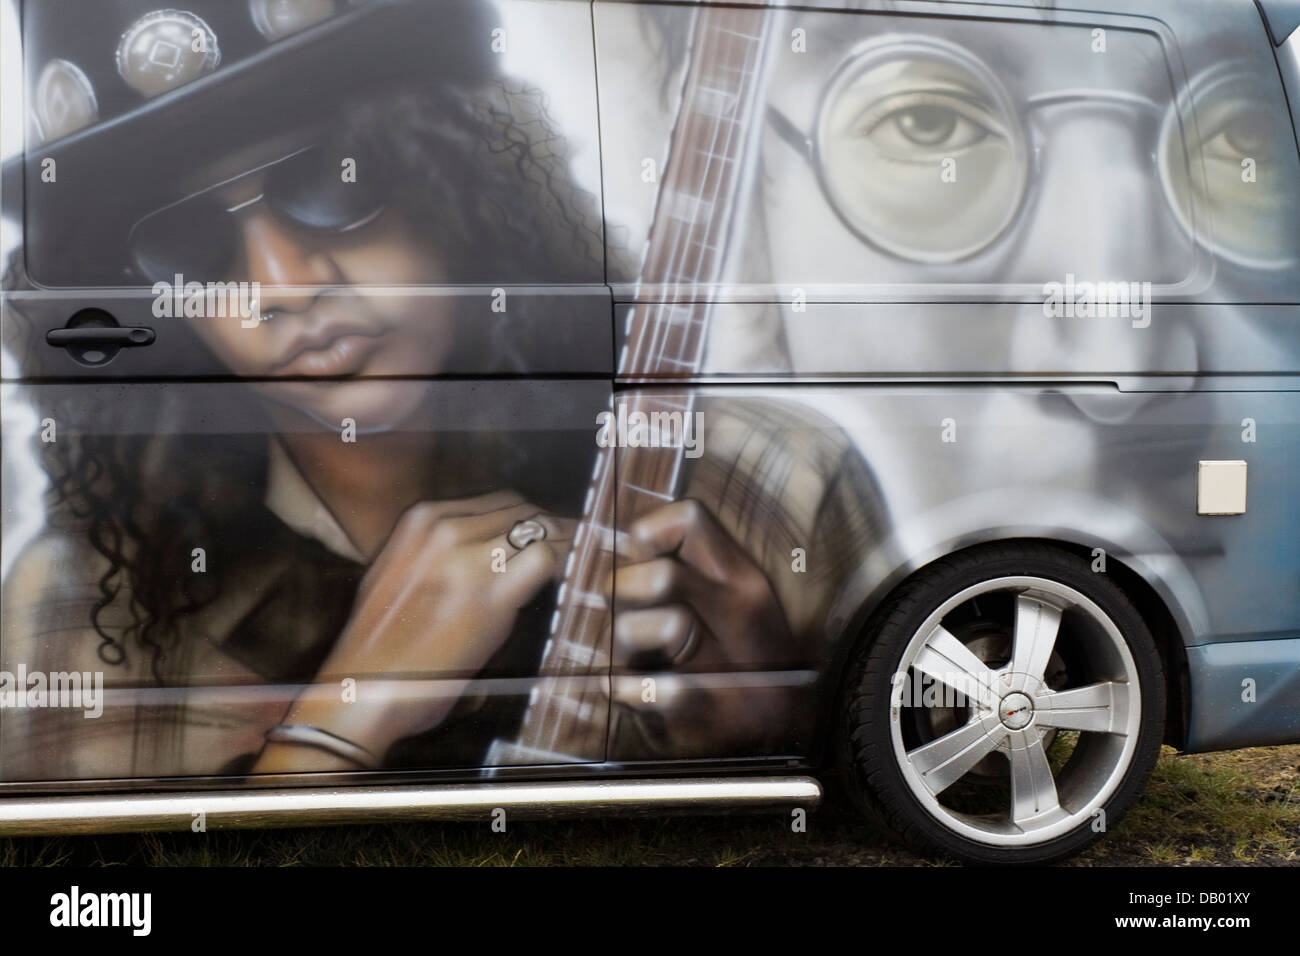 Custom painted VW Camper van with Slash "Saul Hudson" and John Lennon  painted on the side Stock Photo - Alamy